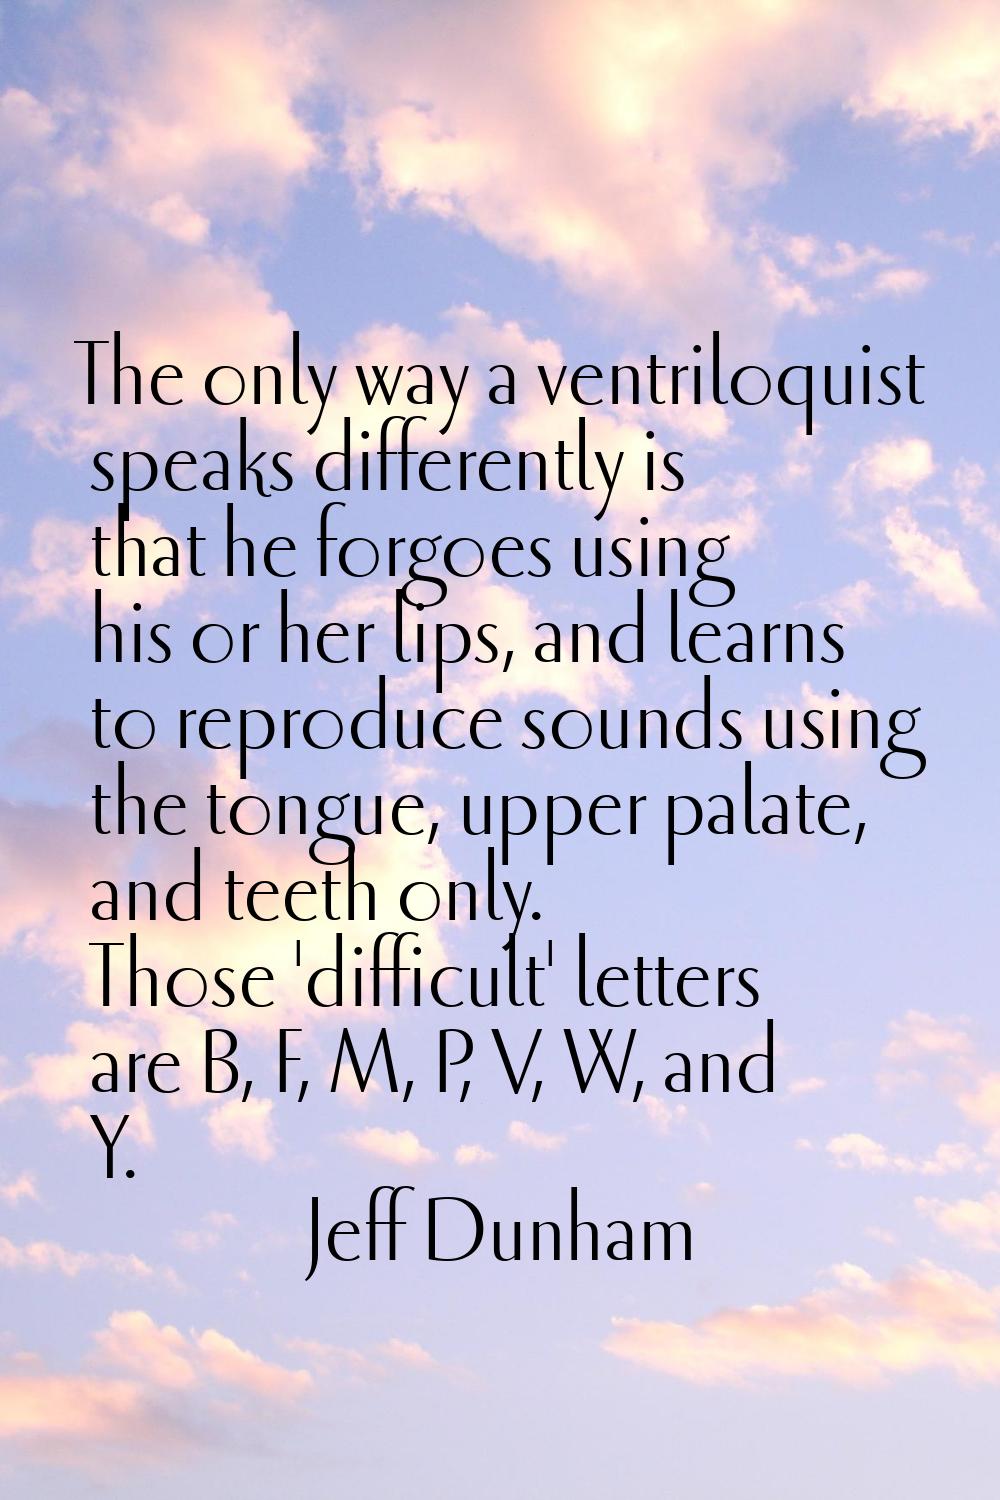 The only way a ventriloquist speaks differently is that he forgoes using his or her lips, and learn